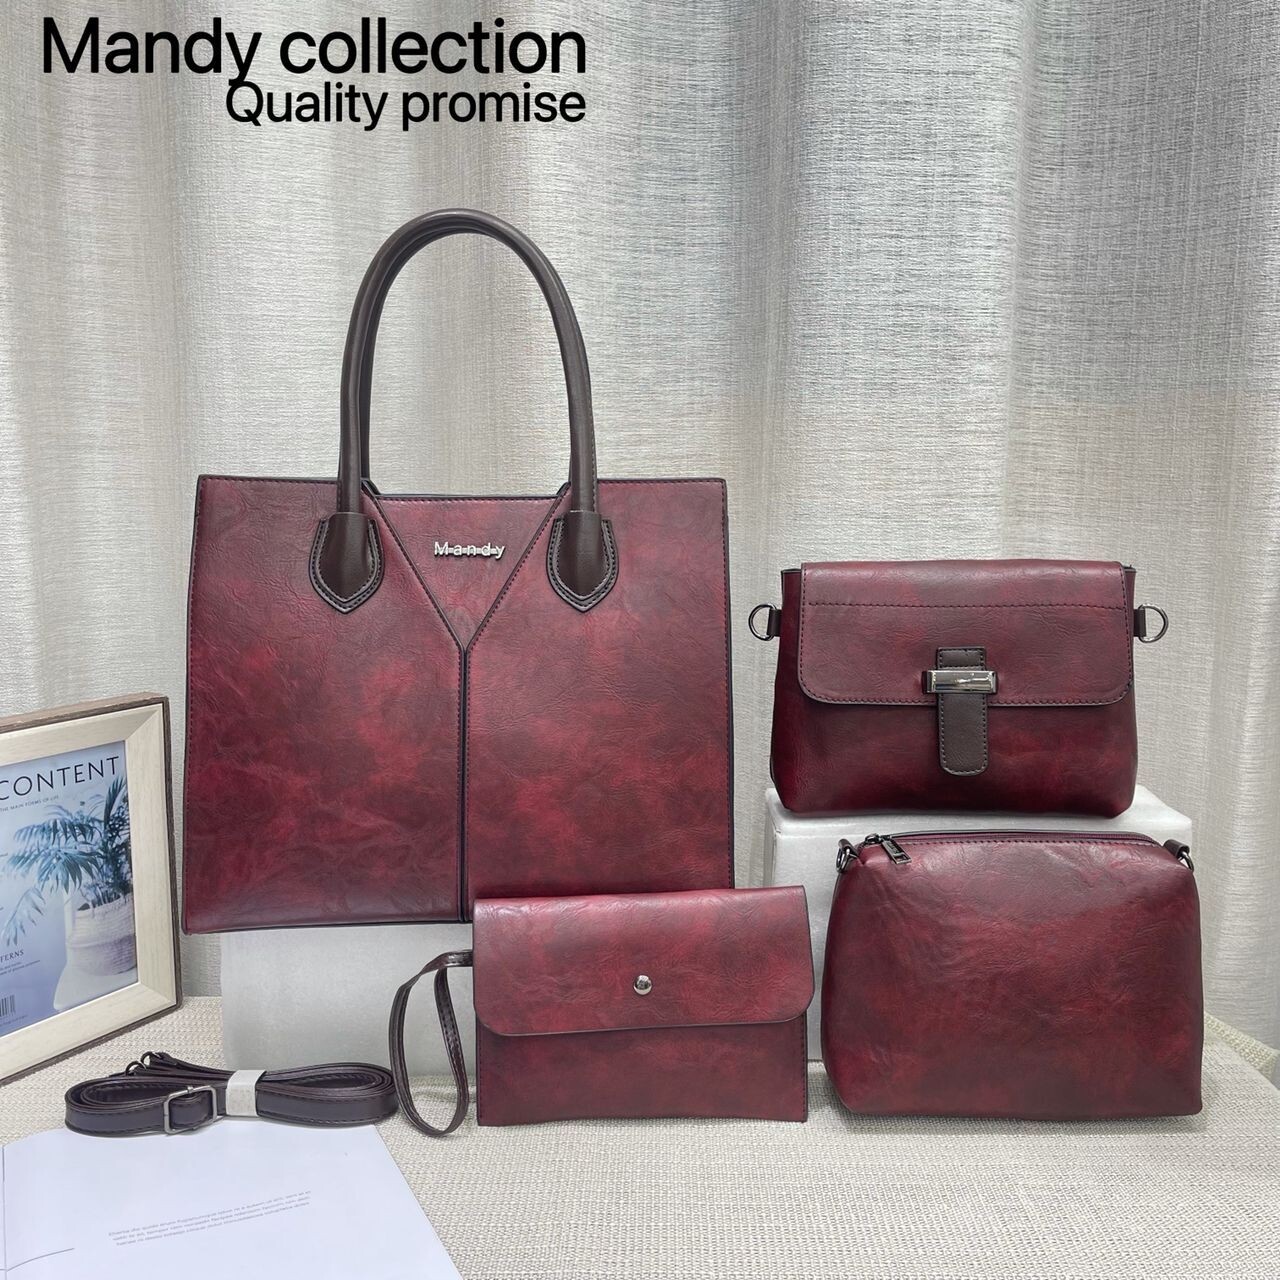 4 in 1 Mandy Collection Quality Promise Modern Design Genuine Leather Women Shoulder Bag - Code 7089